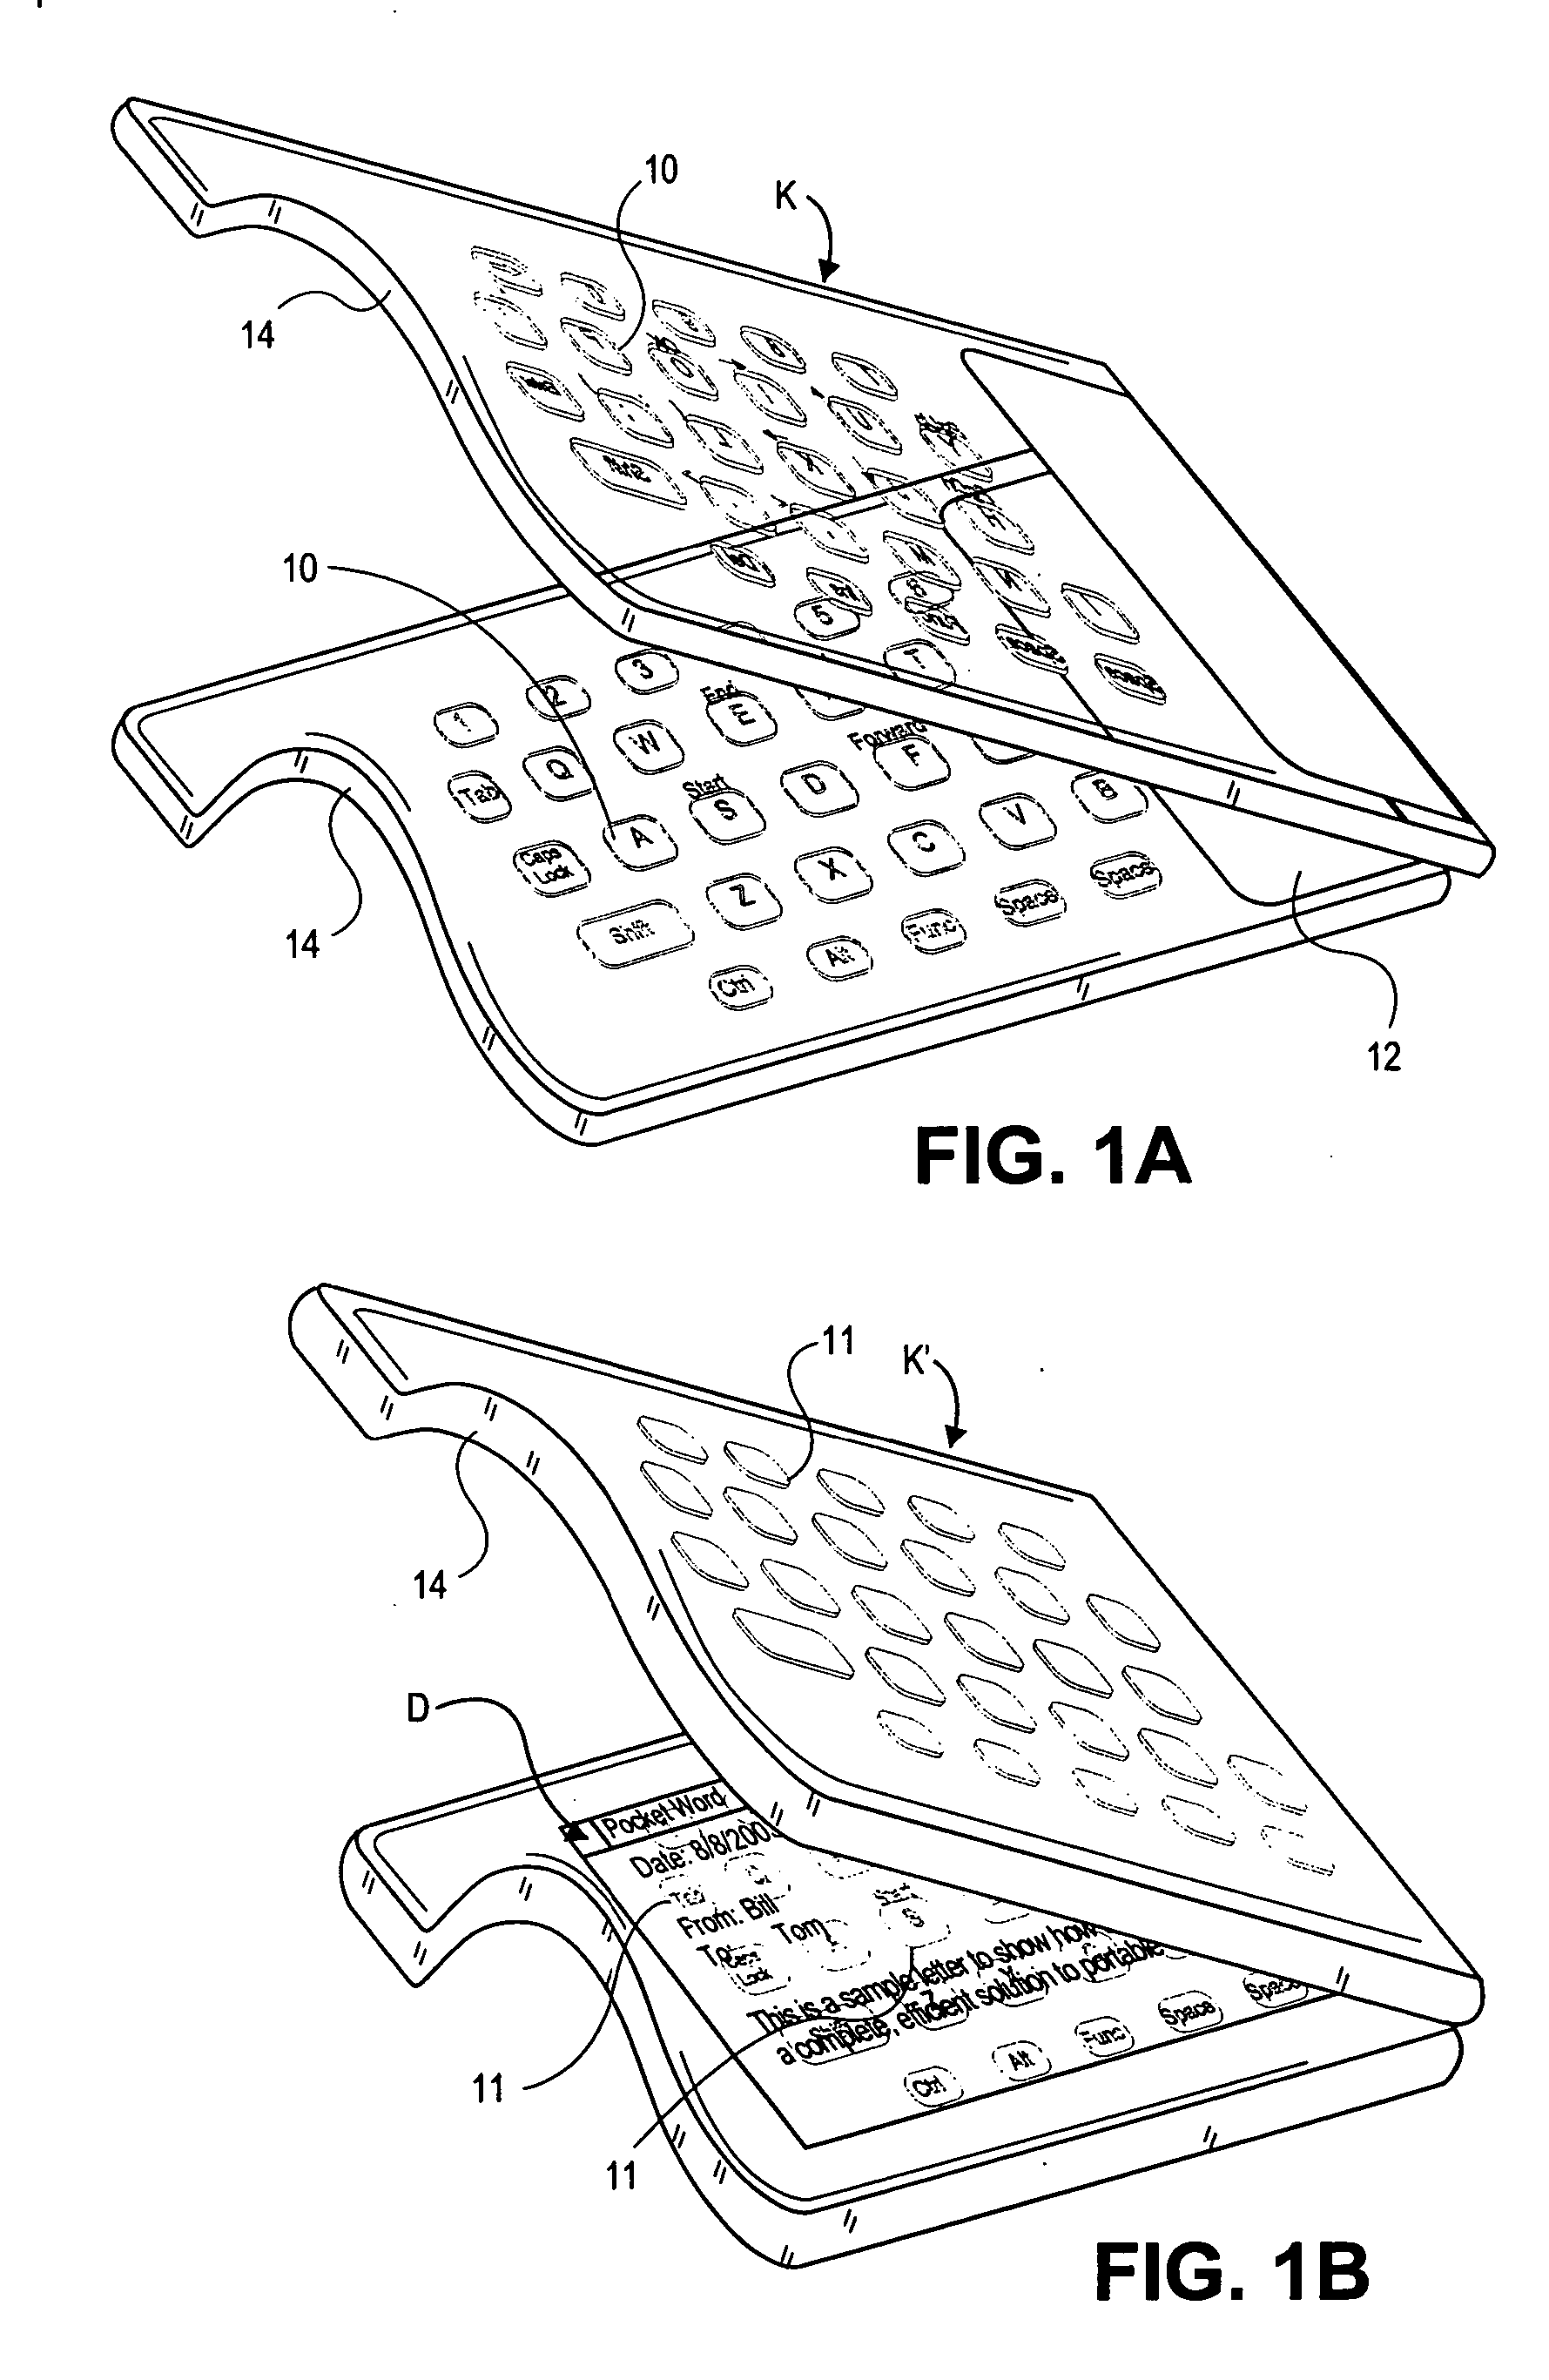 Double side transparent keyboard for miniaturized electronic appliances